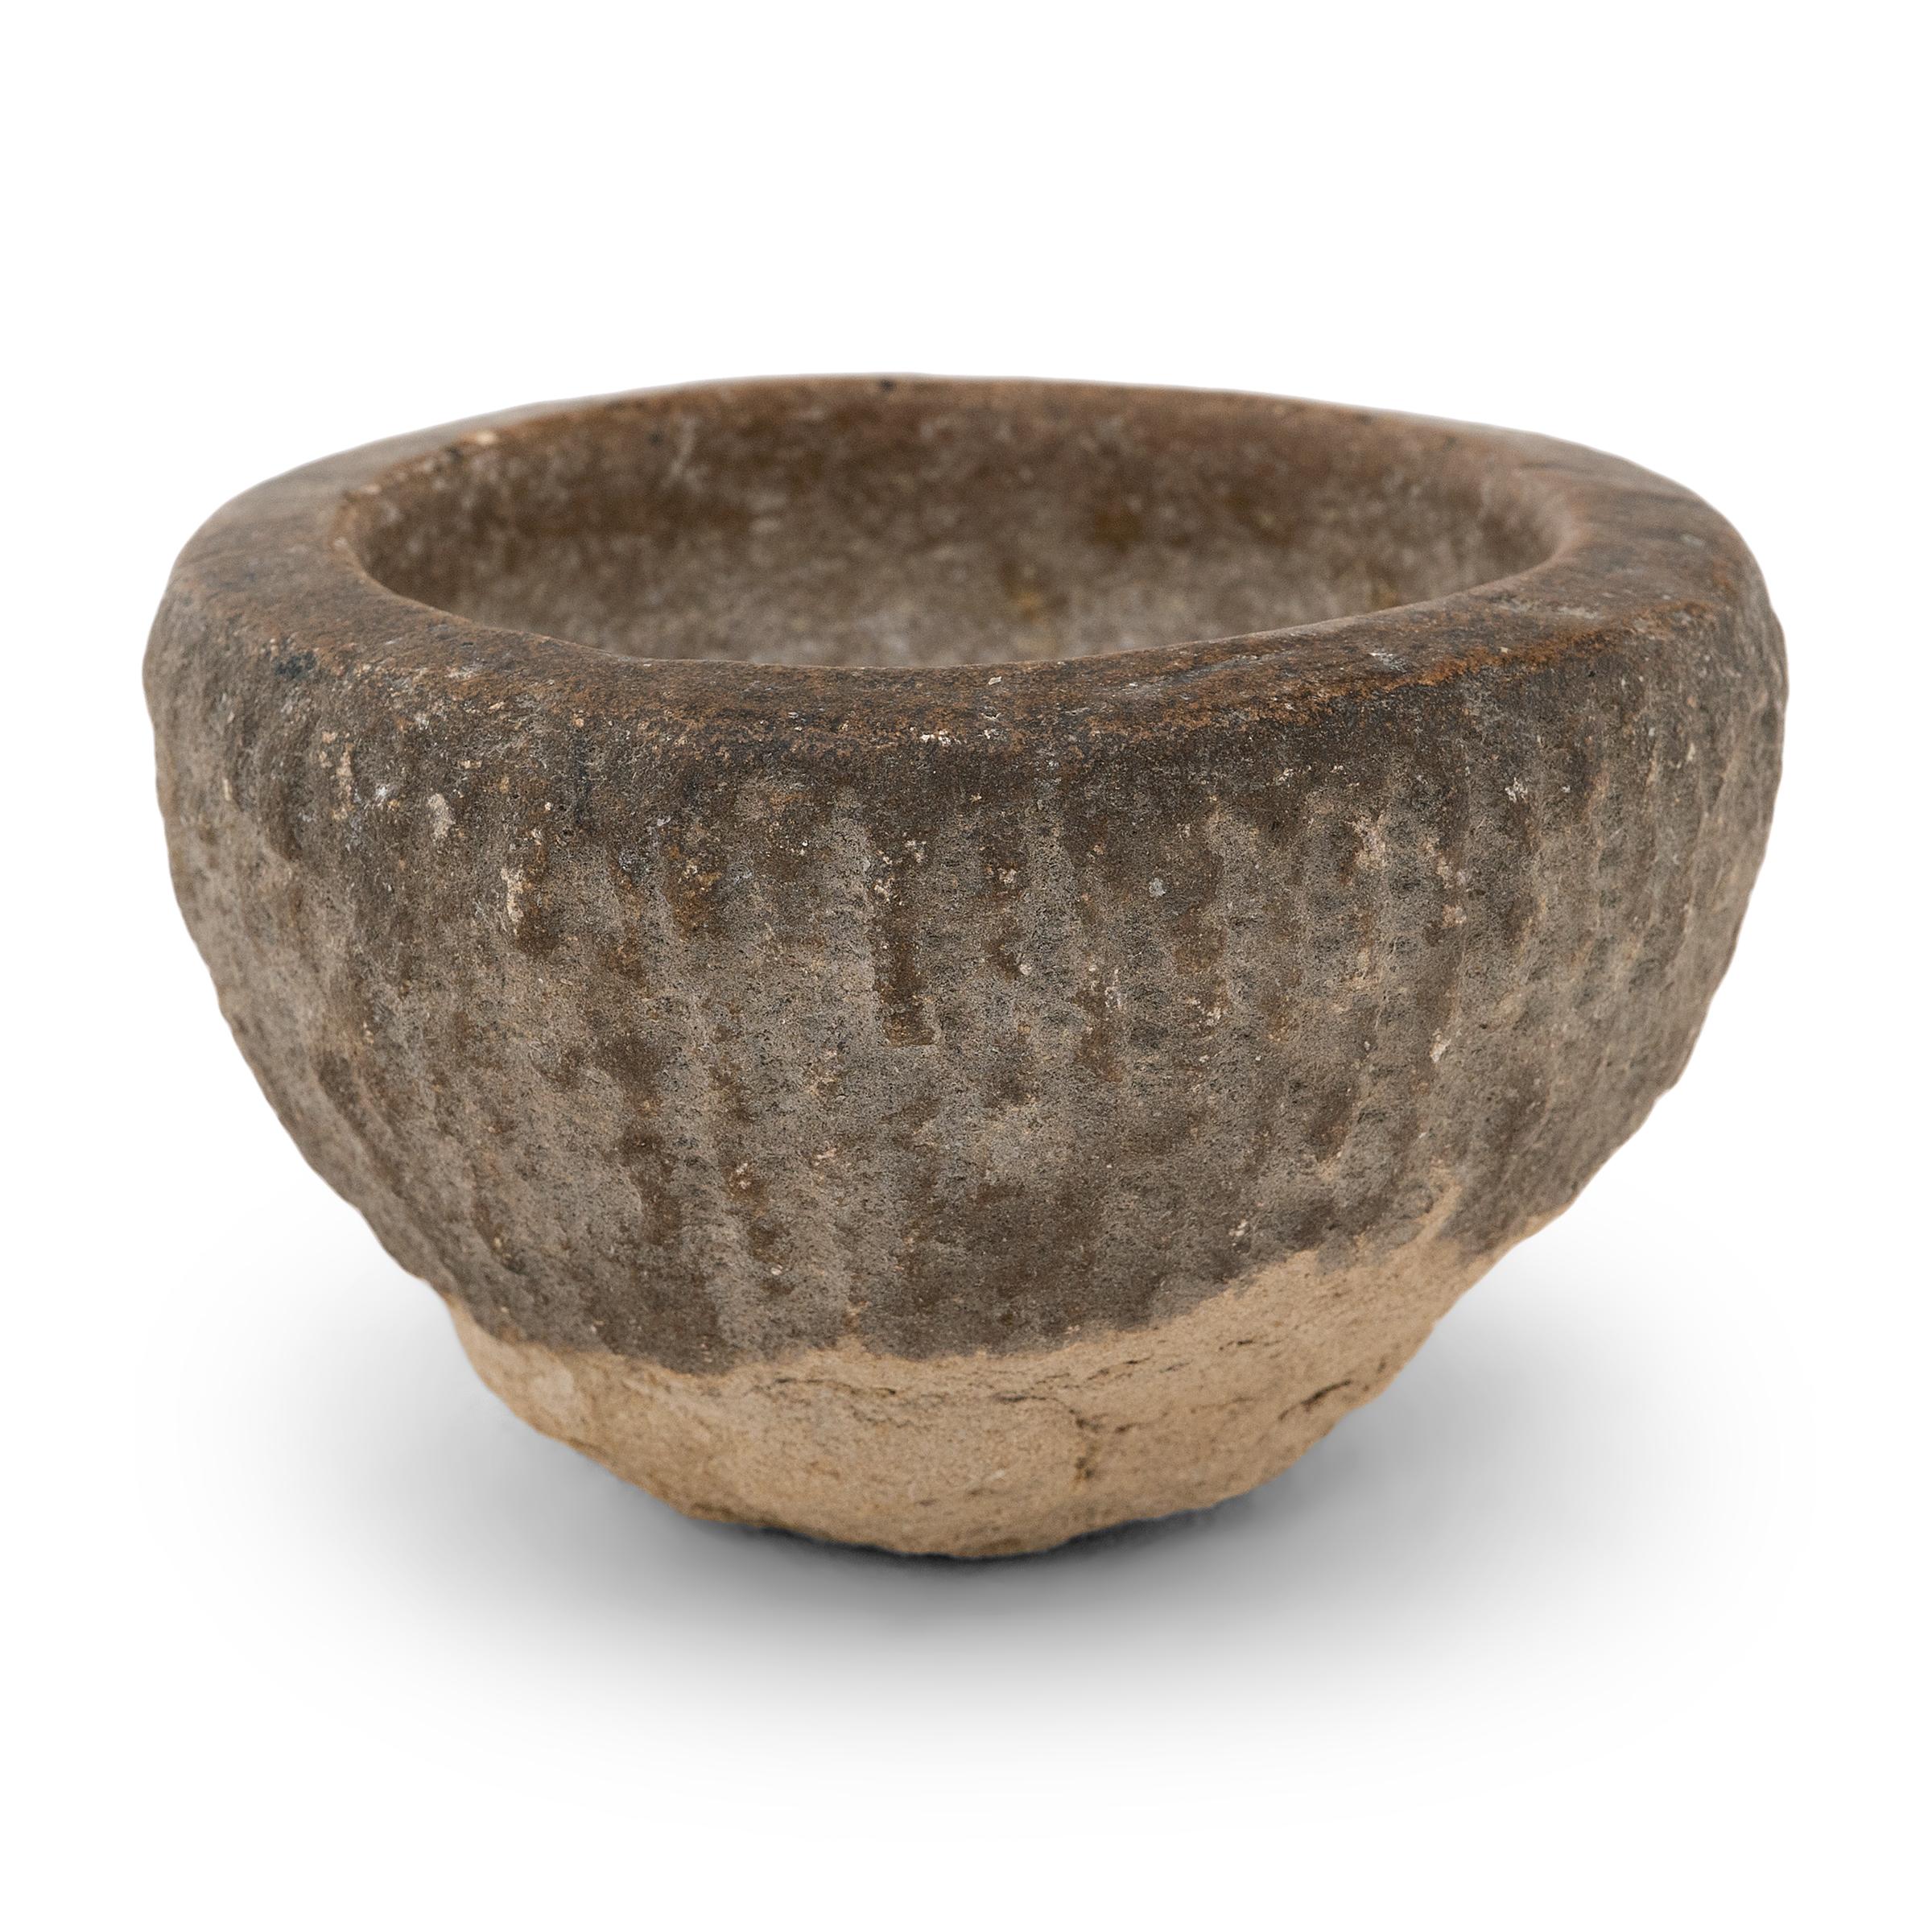 Carved from a single block of limestone, this stone vessel is an early 19th century mortar once used to grind spices, herbs, and other condiments. The hand chiseled, rustic exterior is worn gorgeously with age while the interior is smooth from daily